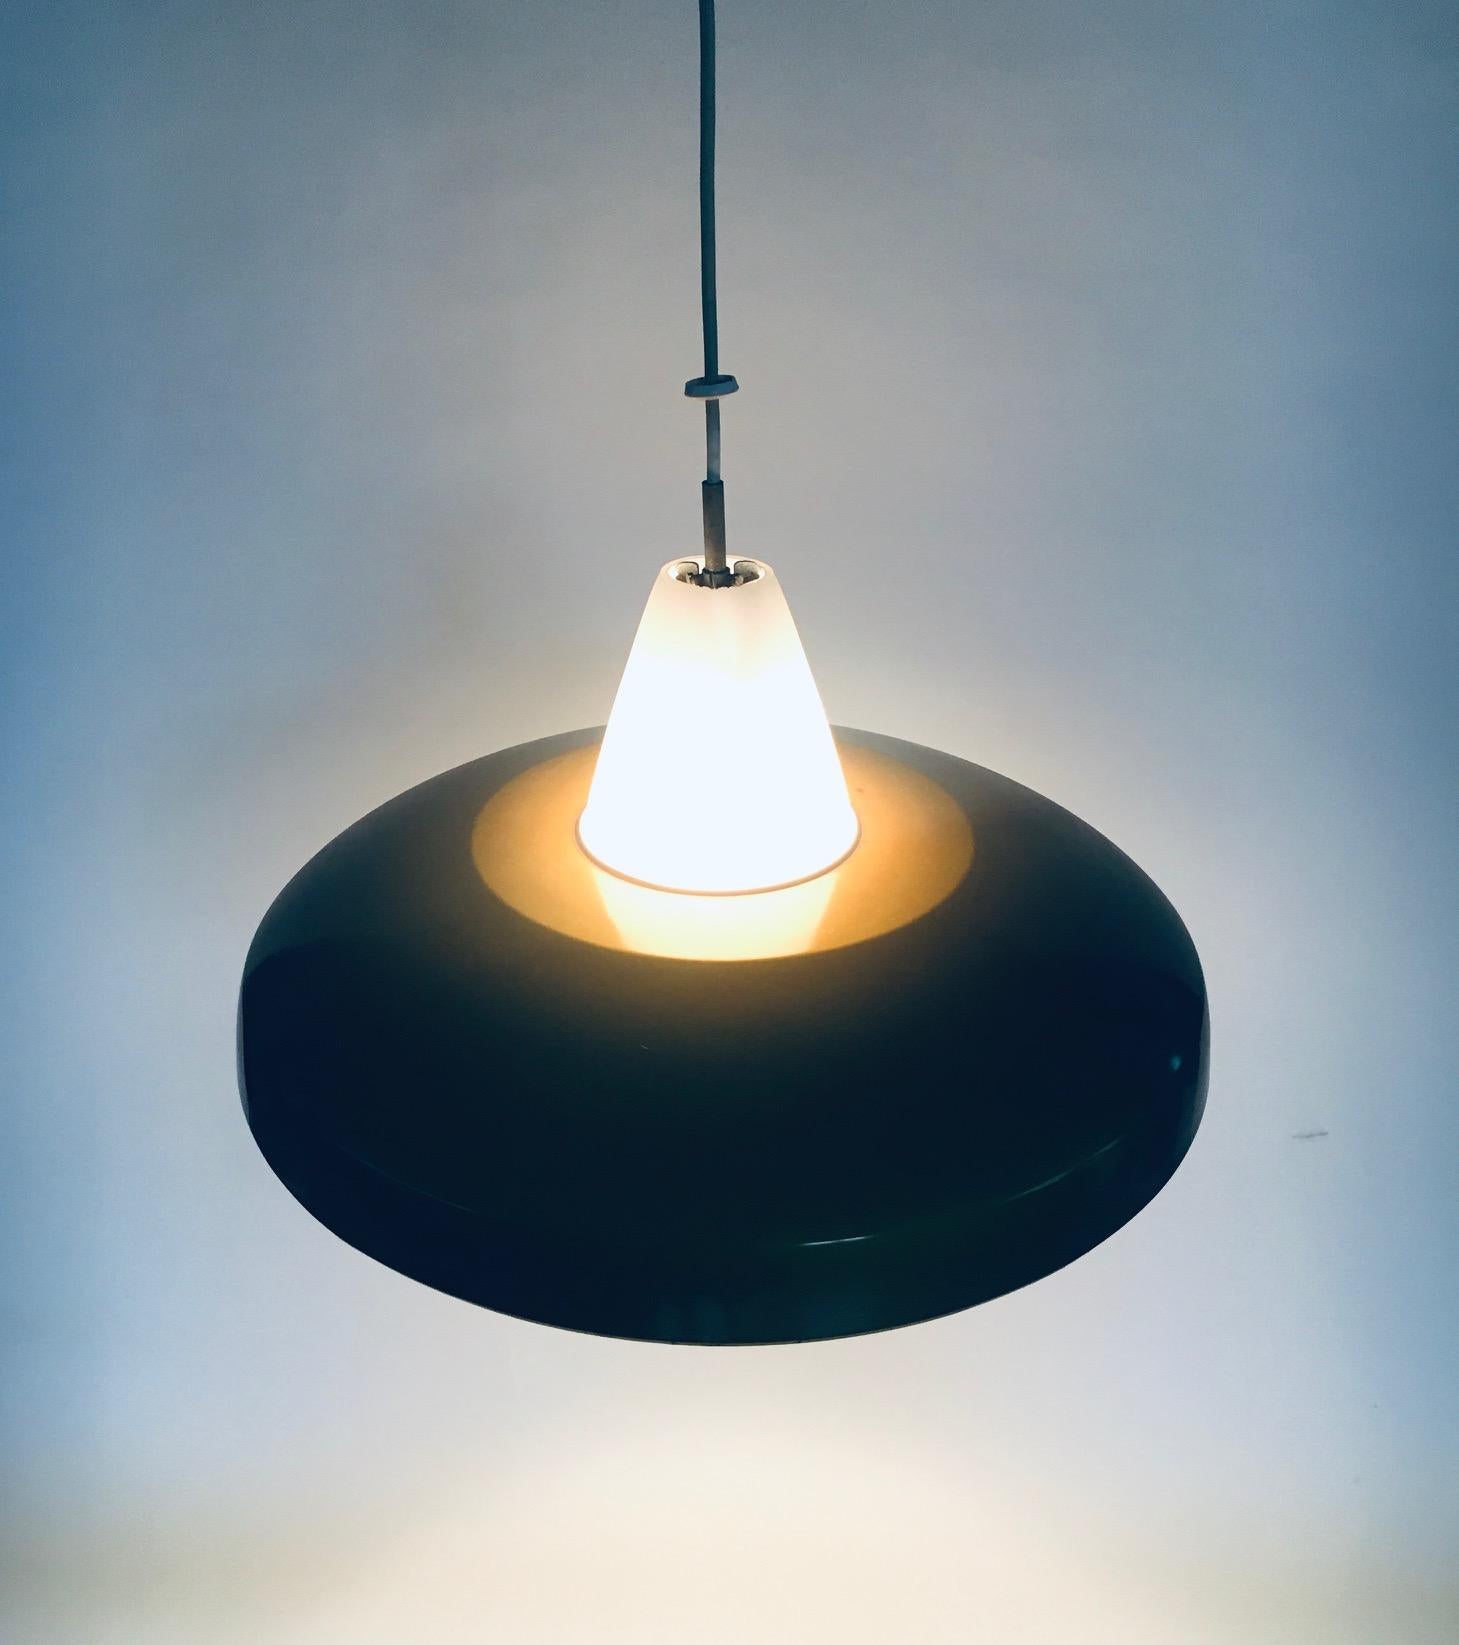 Mid-Century Modern Dutch Design Pendant Lamp by Philips, 1950s For Sale 4